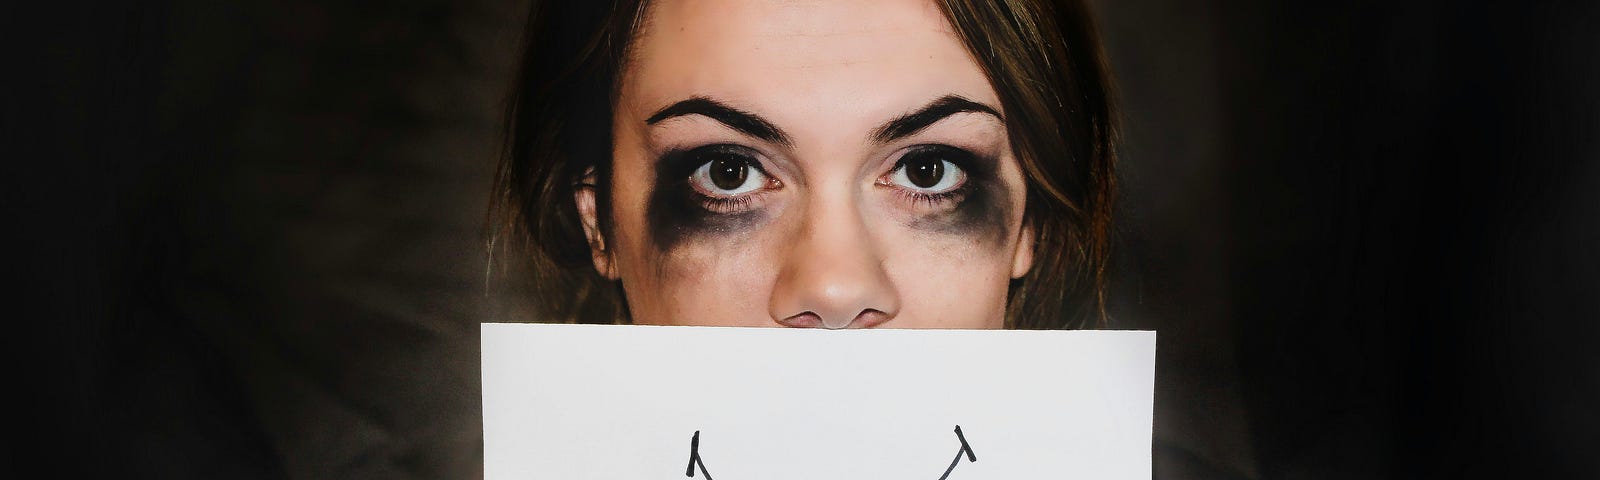 A woman who was crying, with mascara running under her eyes, holding a piece of paper over her face with a smile drawn on it. She has brown hair, a gray-blue shirt, and painted black fingernails